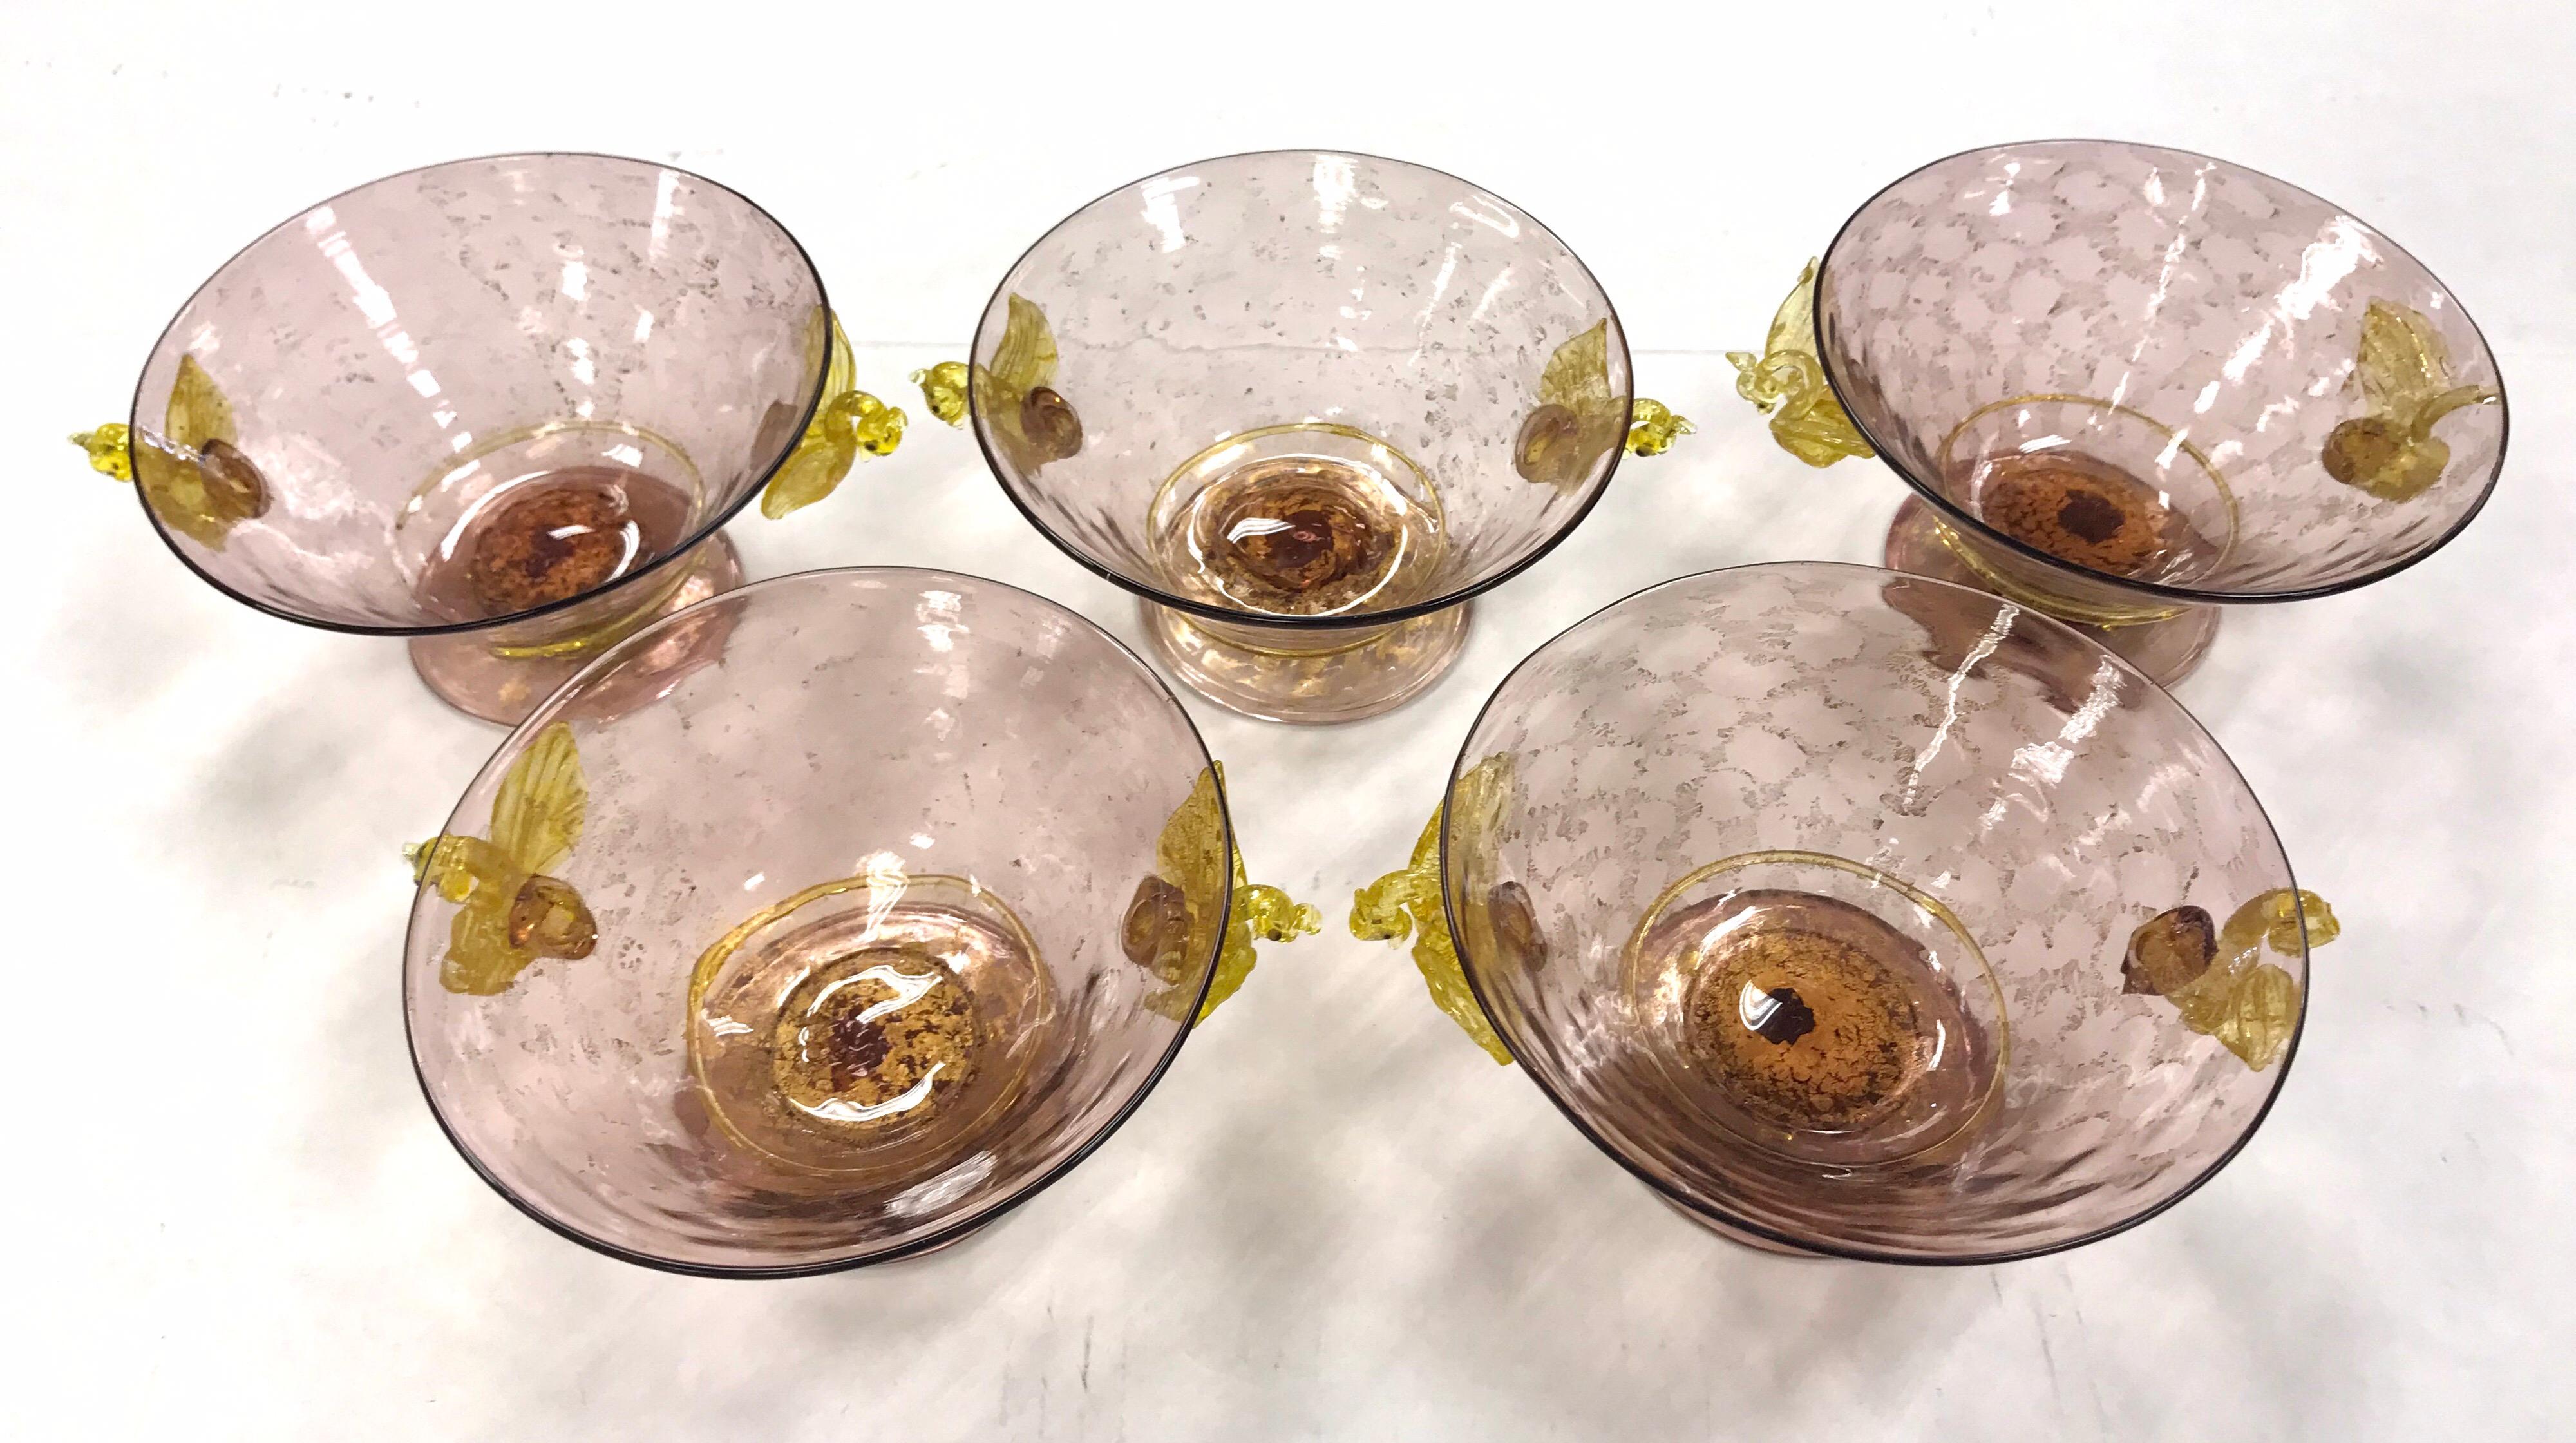 This is a set of rare, hand blown Venetian bowls made by Salviati, circa 1920s. They feature a figural golden yellow swan connector and applied applique. The color is pink with gold leaf inclusions which works nicely with a pastel palette.